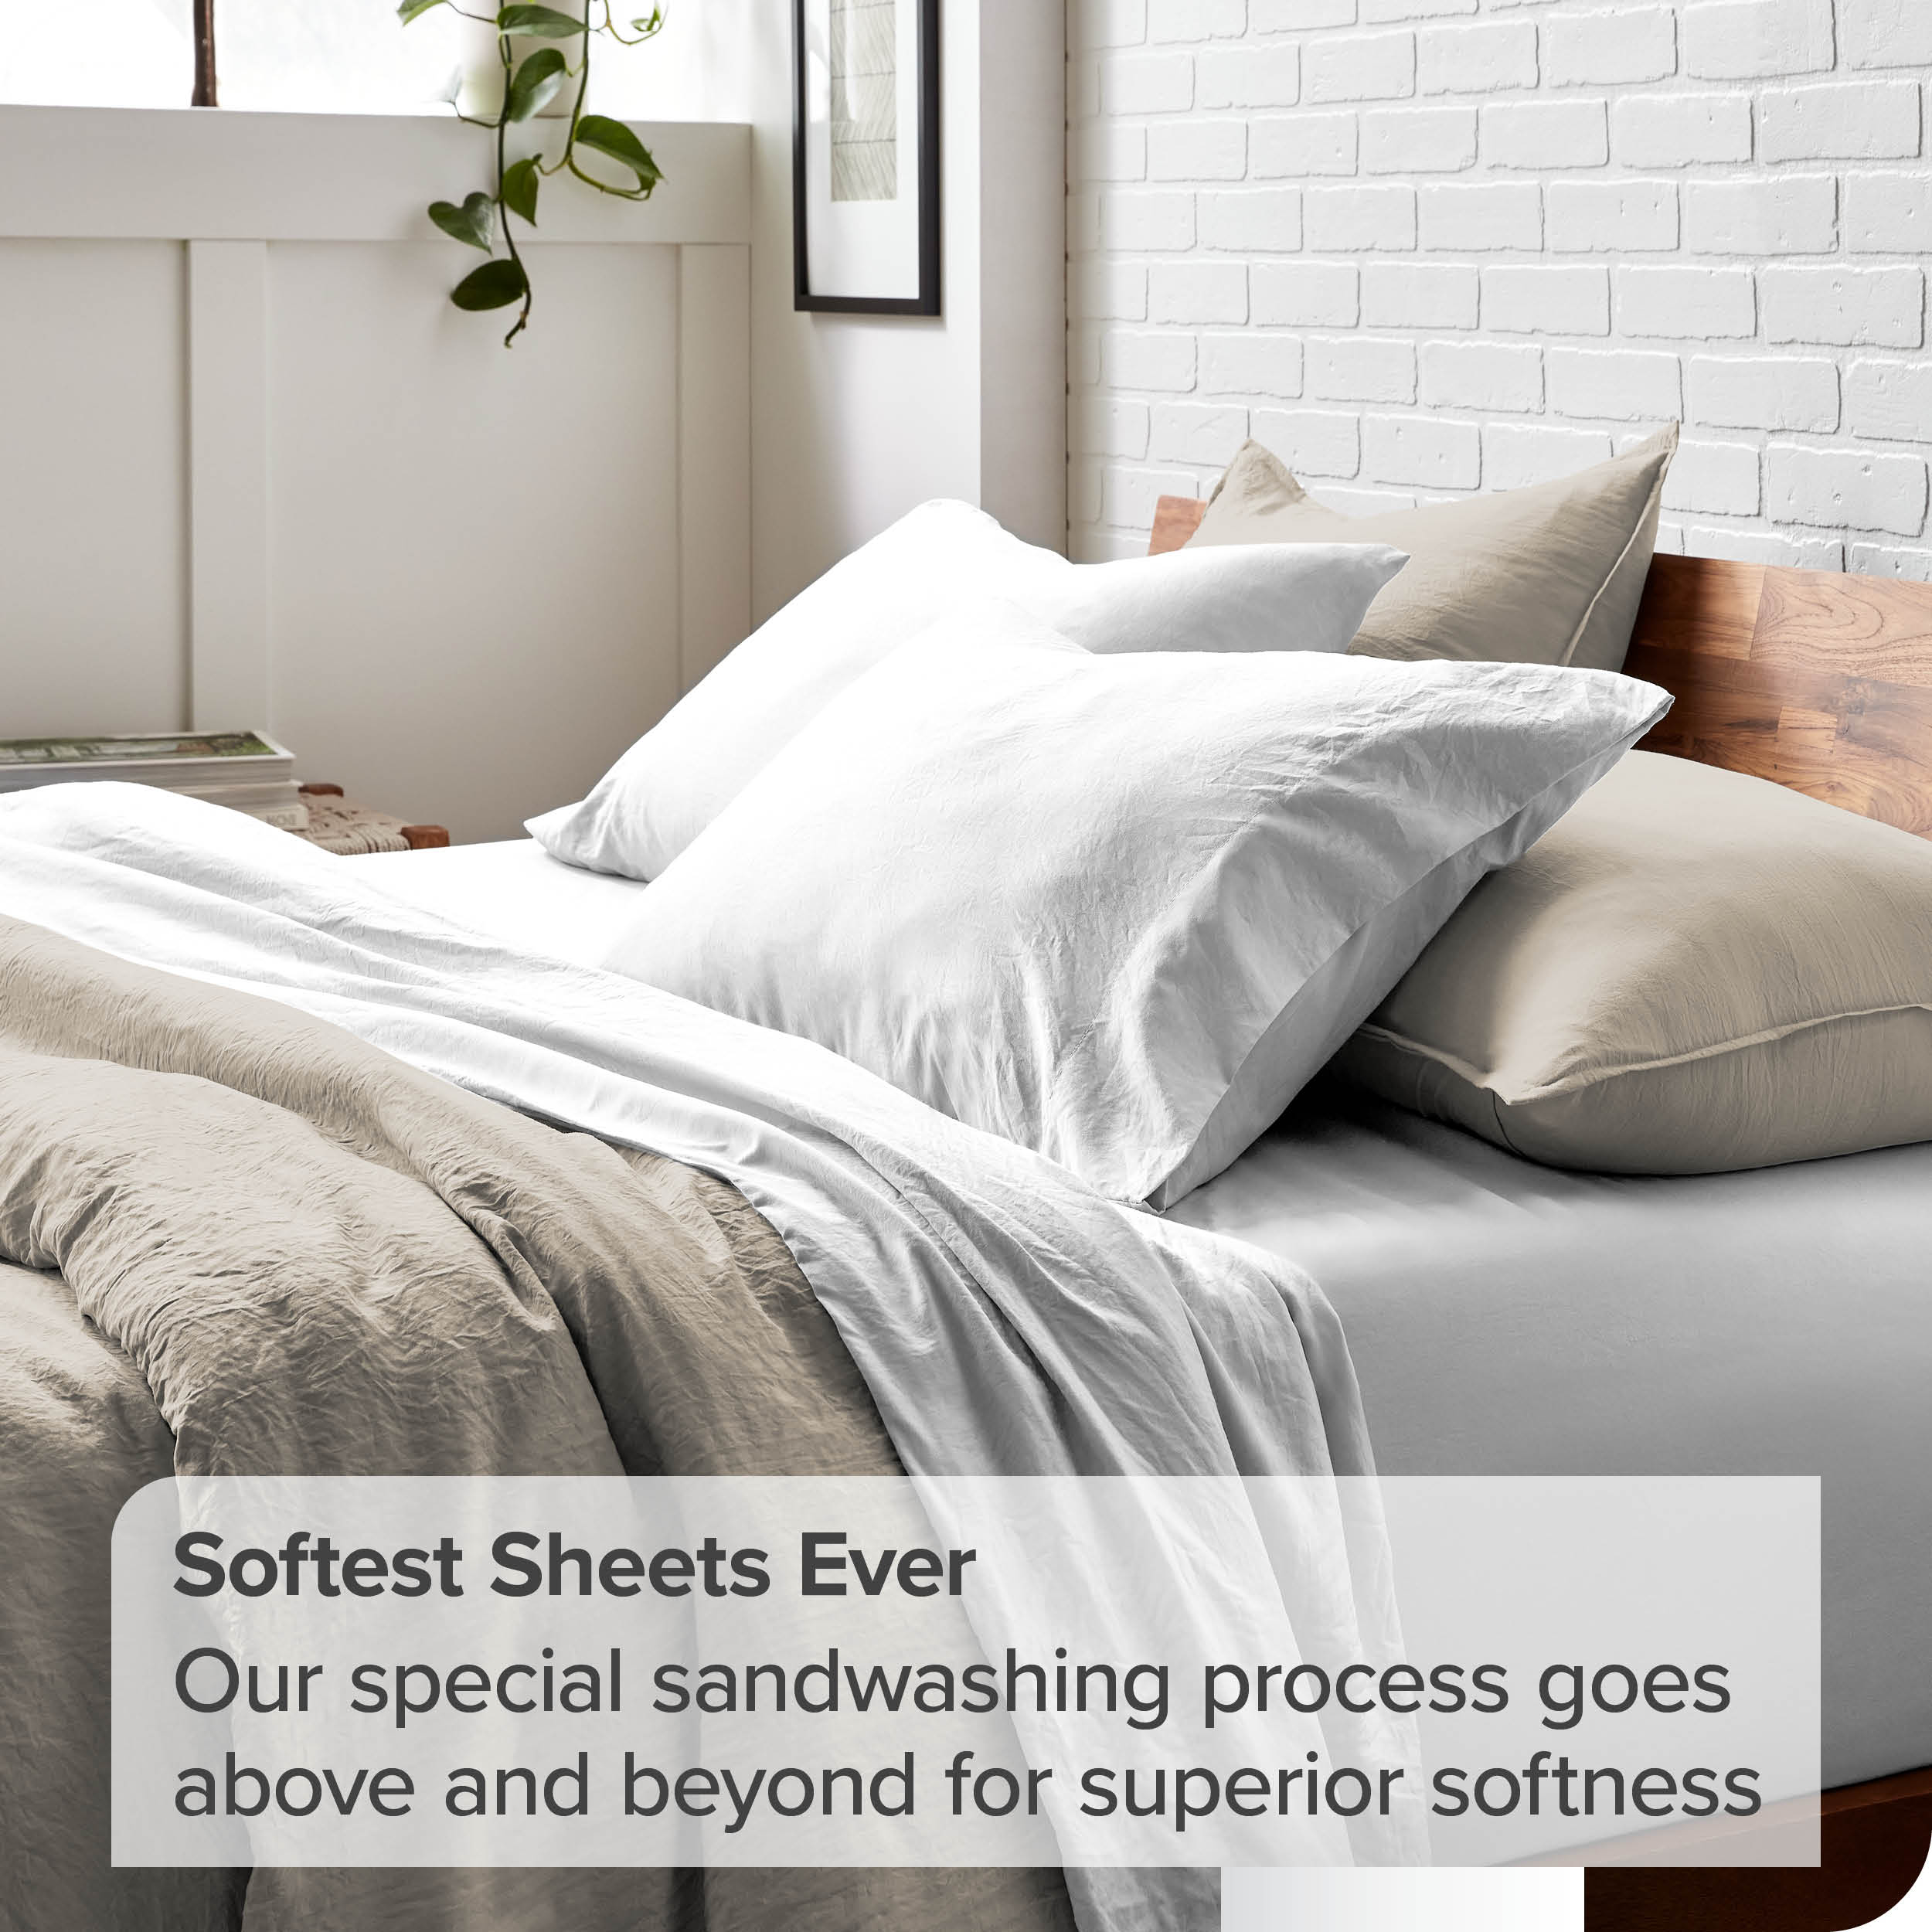 Bare Home Washed Duvet Cover and Sham Set - Premium 1800 Ultra-Soft Brushed Microfiber - Hypoallergenic, Stain Resistant